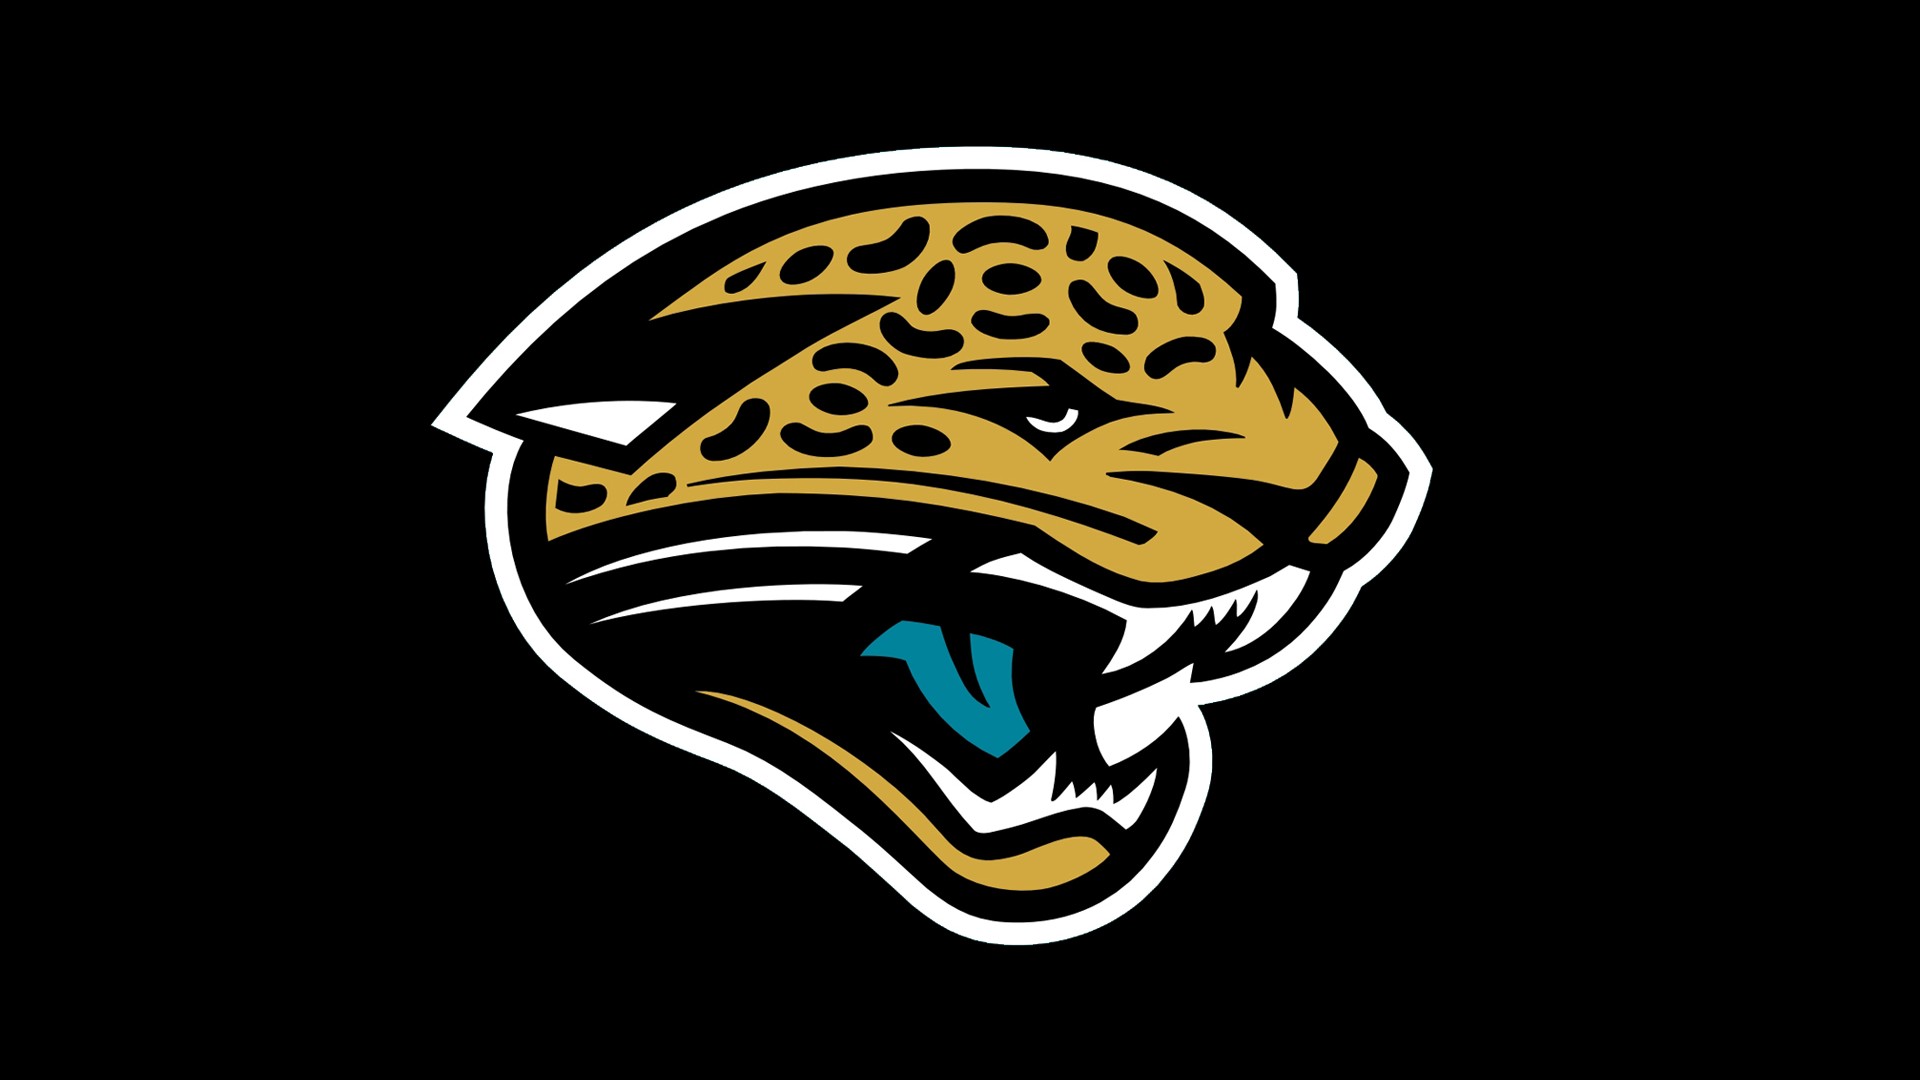 HD Desktop Wallpaper Jacksonville Jaguars with resolution 1920x1080 pixel. You can make this wallpaper for your Mac or Windows Desktop Background, iPhone, Android or Tablet and another Smartphone device